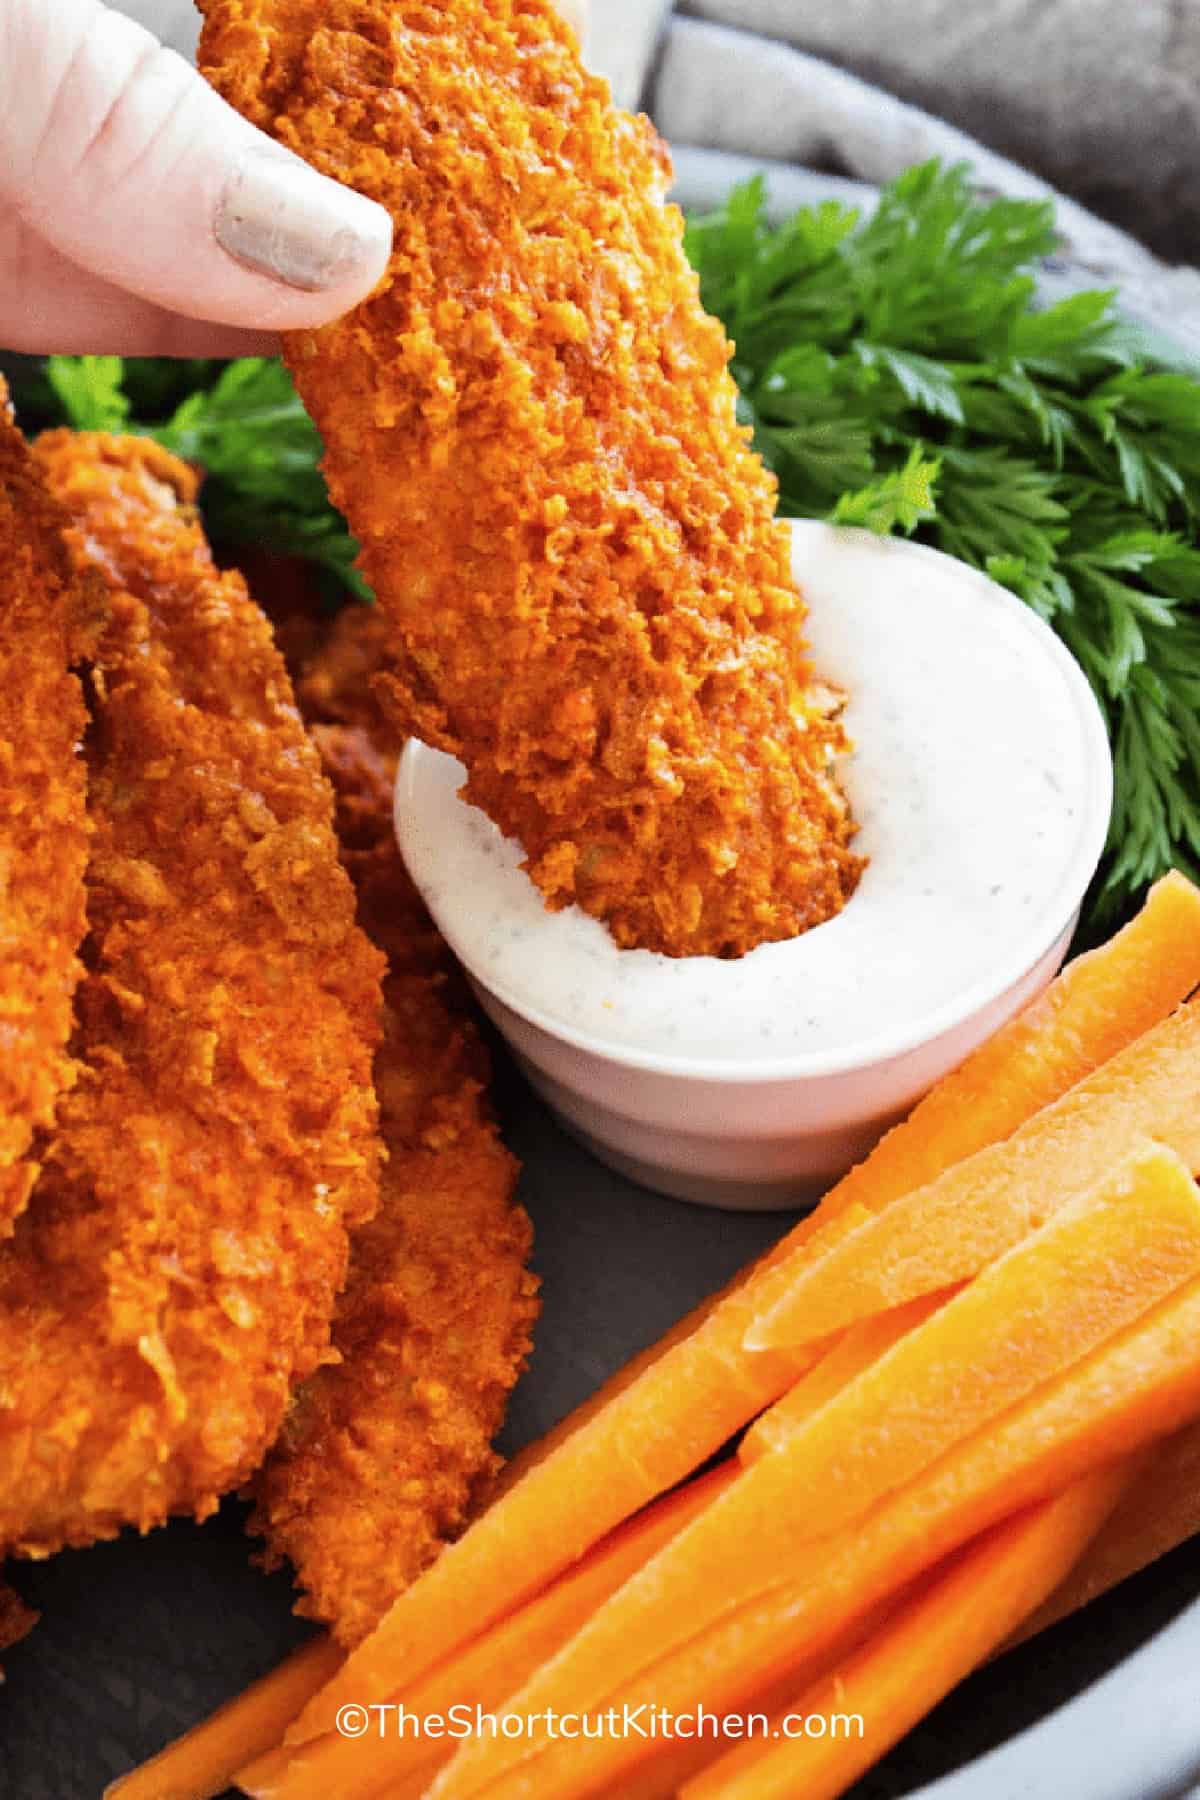 Crispy buffalo chicken tenders on a platter with carrot sticks, and one chicken tender is being dipped into dressing